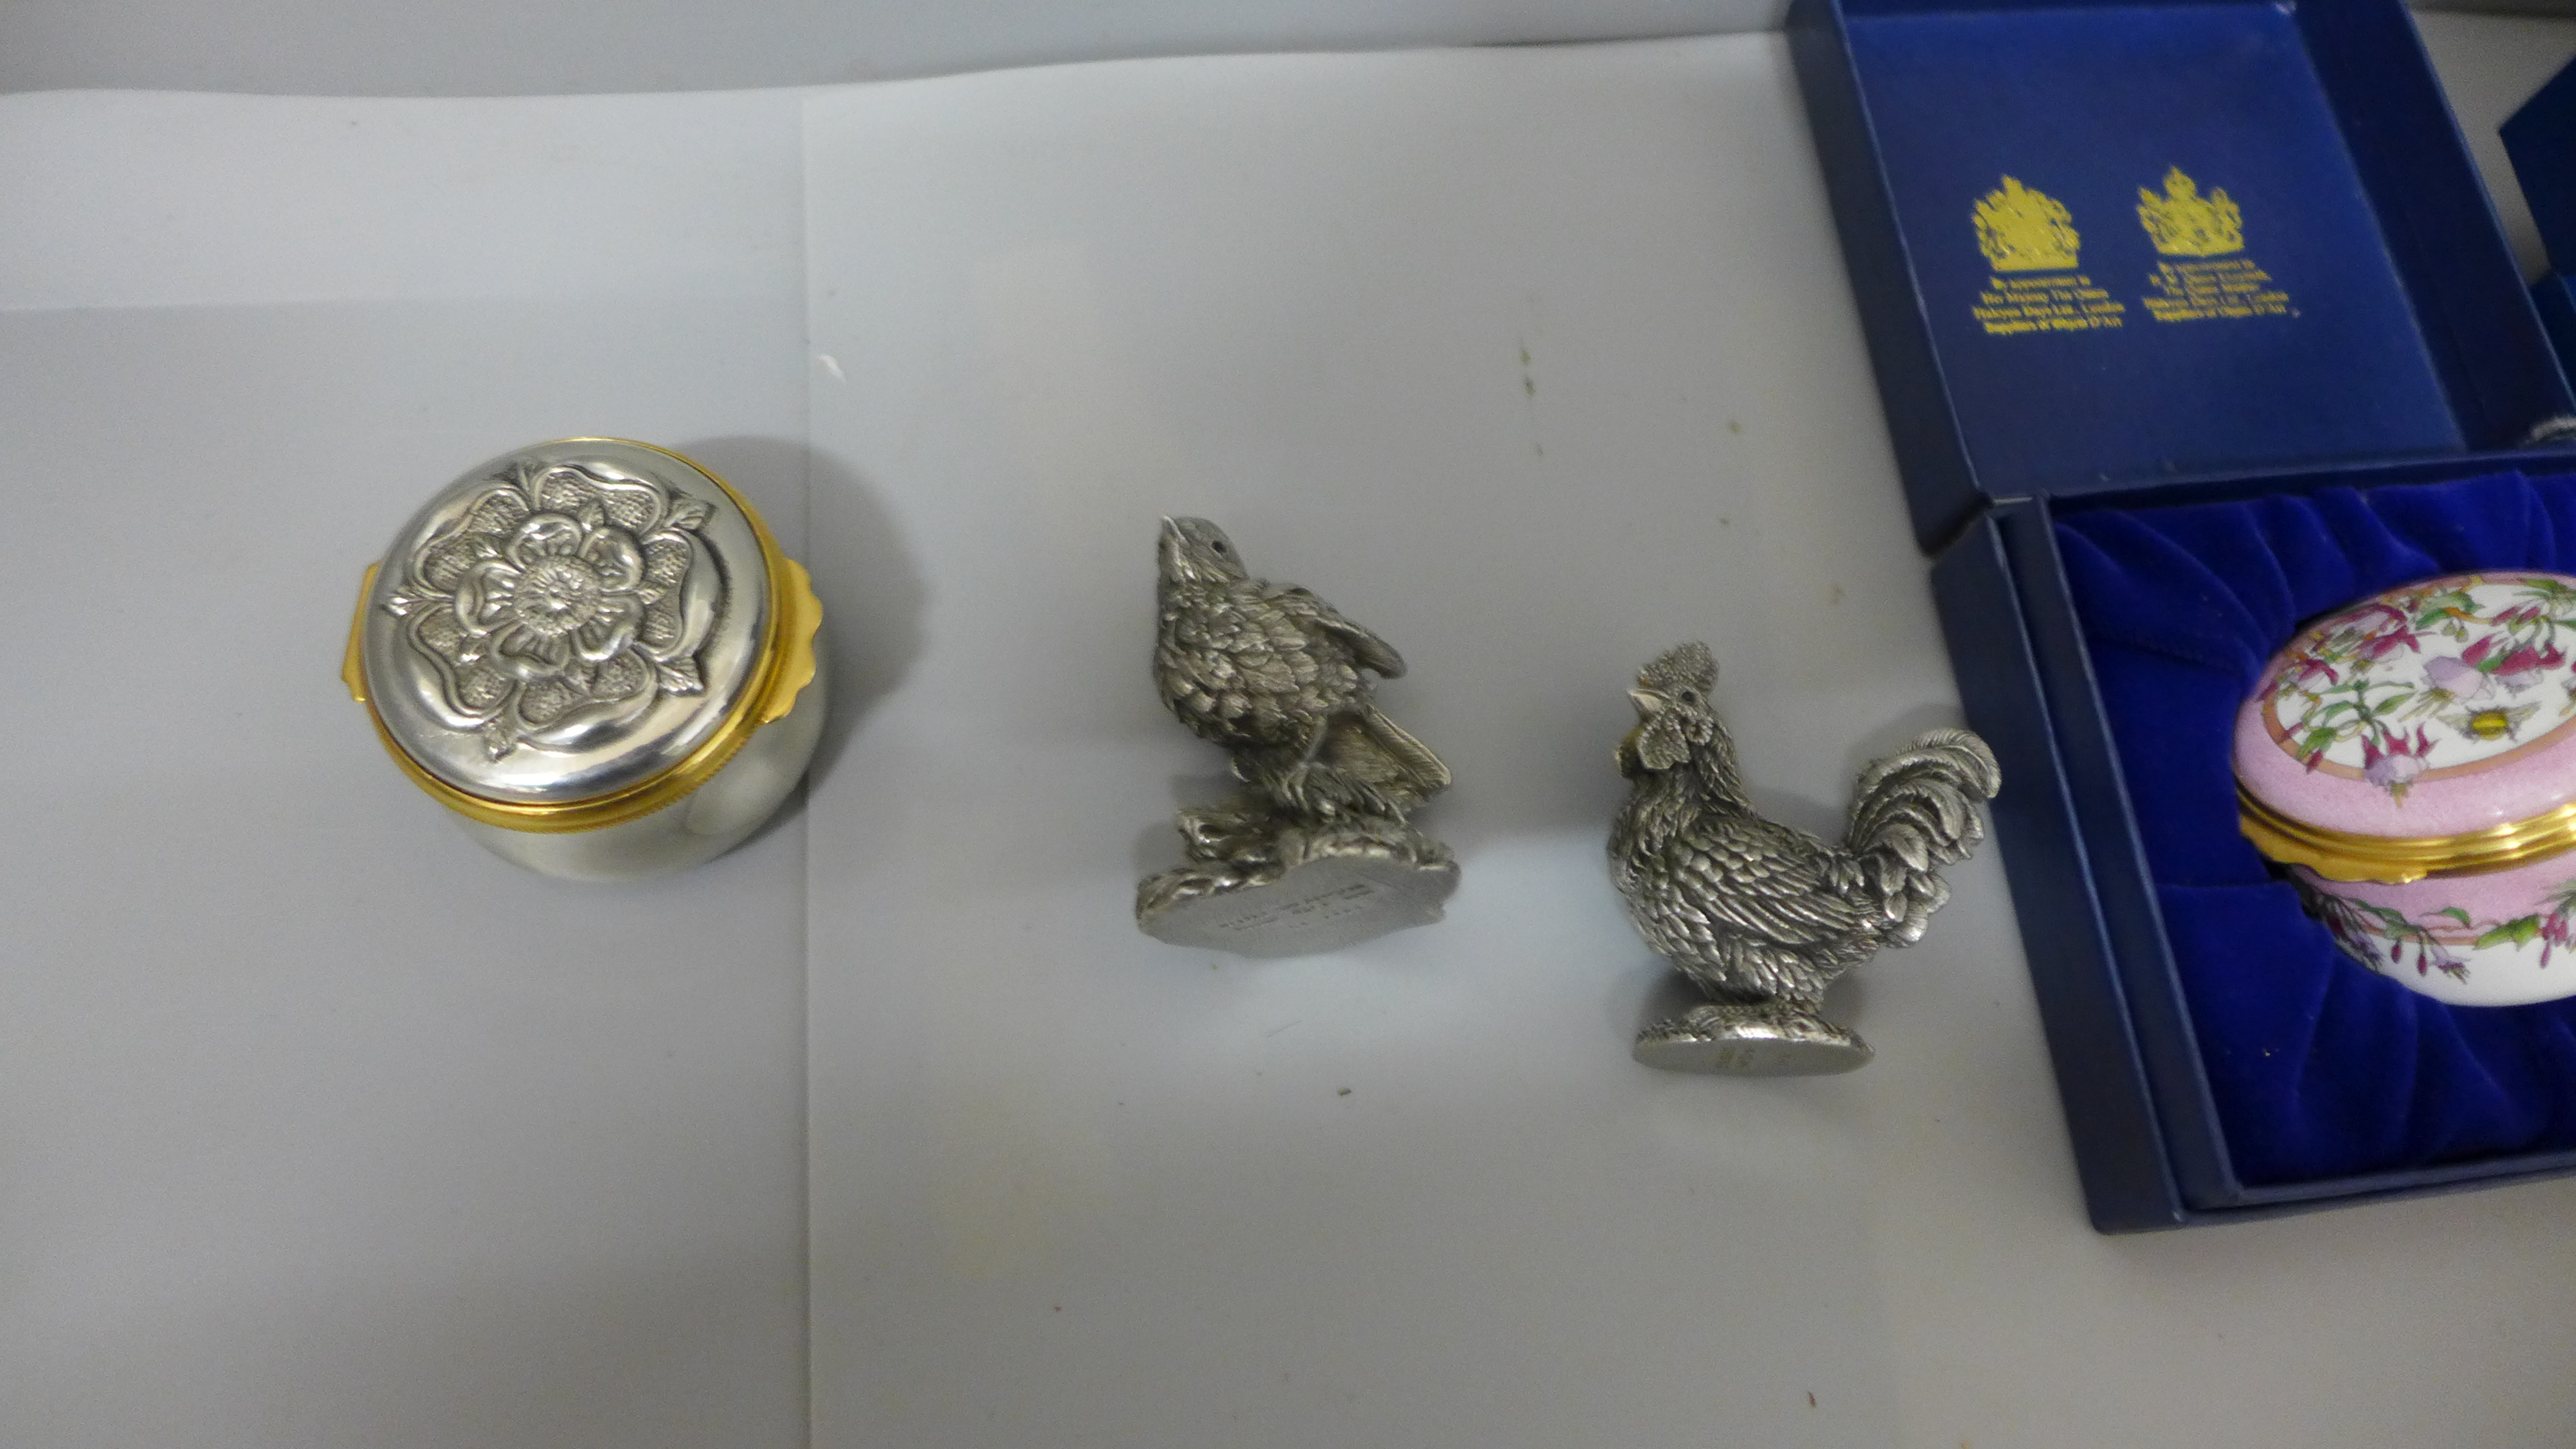 Four Halcyon Days Enamels trinket boxes, all boxed, and three items of Royal Selangor pewter - Image 2 of 2